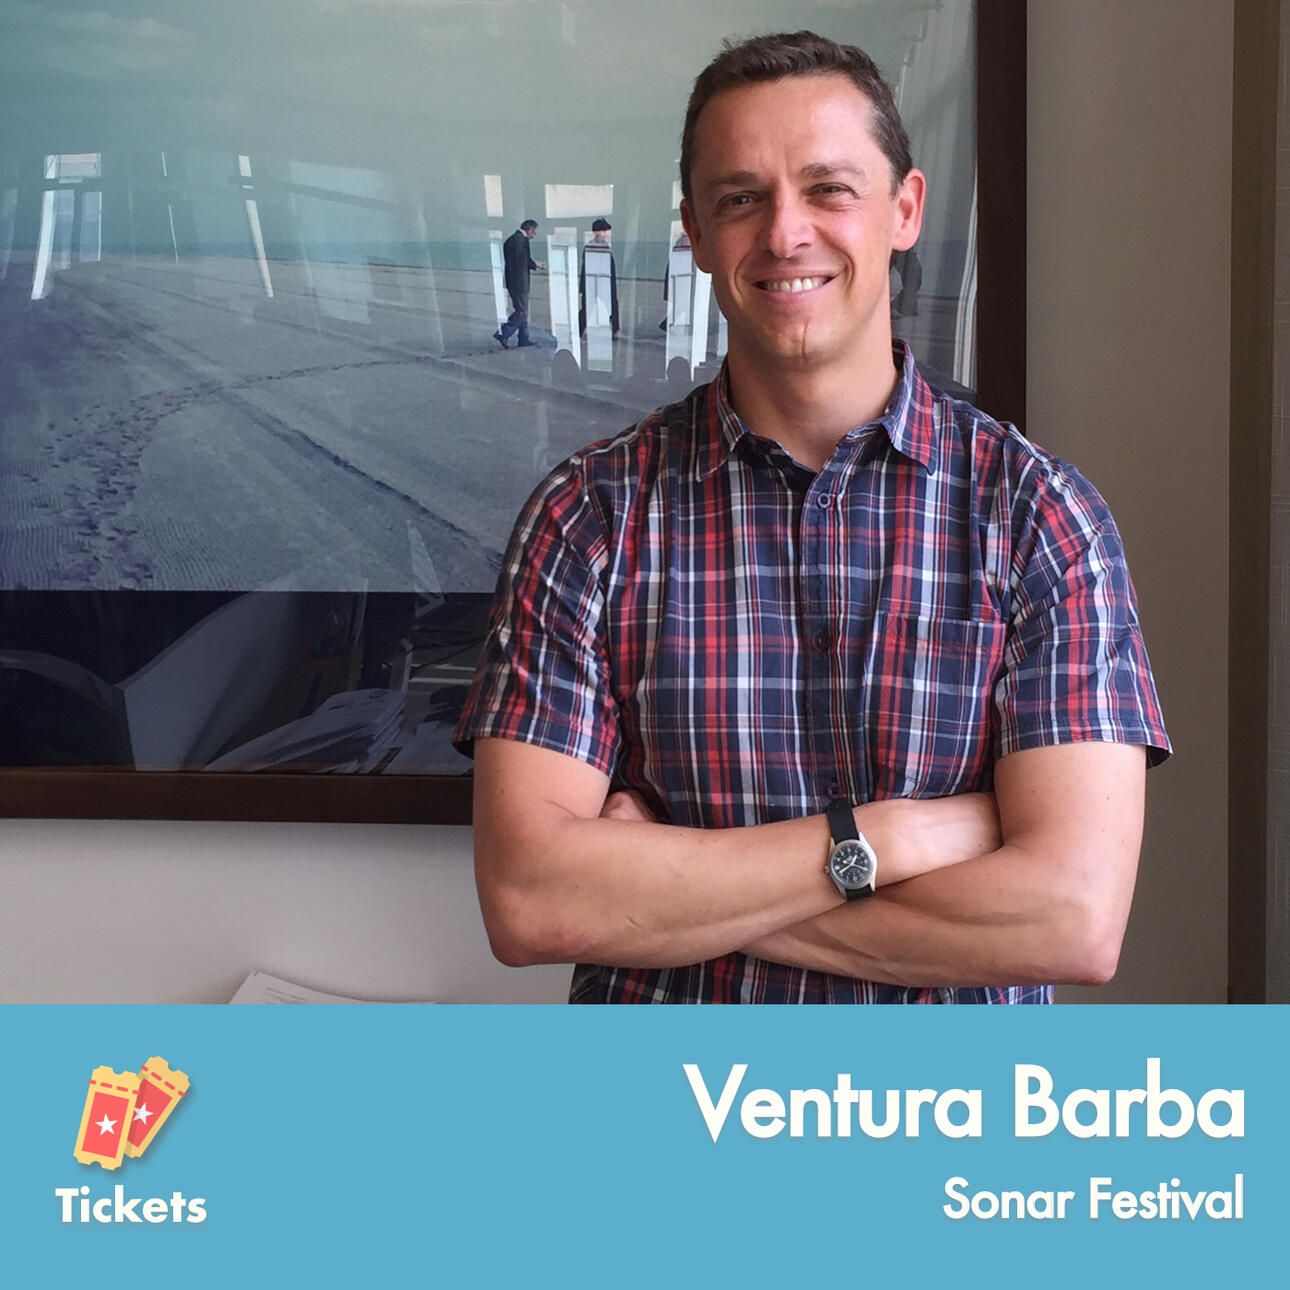 Tickets Podcast: Fusing music and technology with Sonar Festival's Ventura Barba